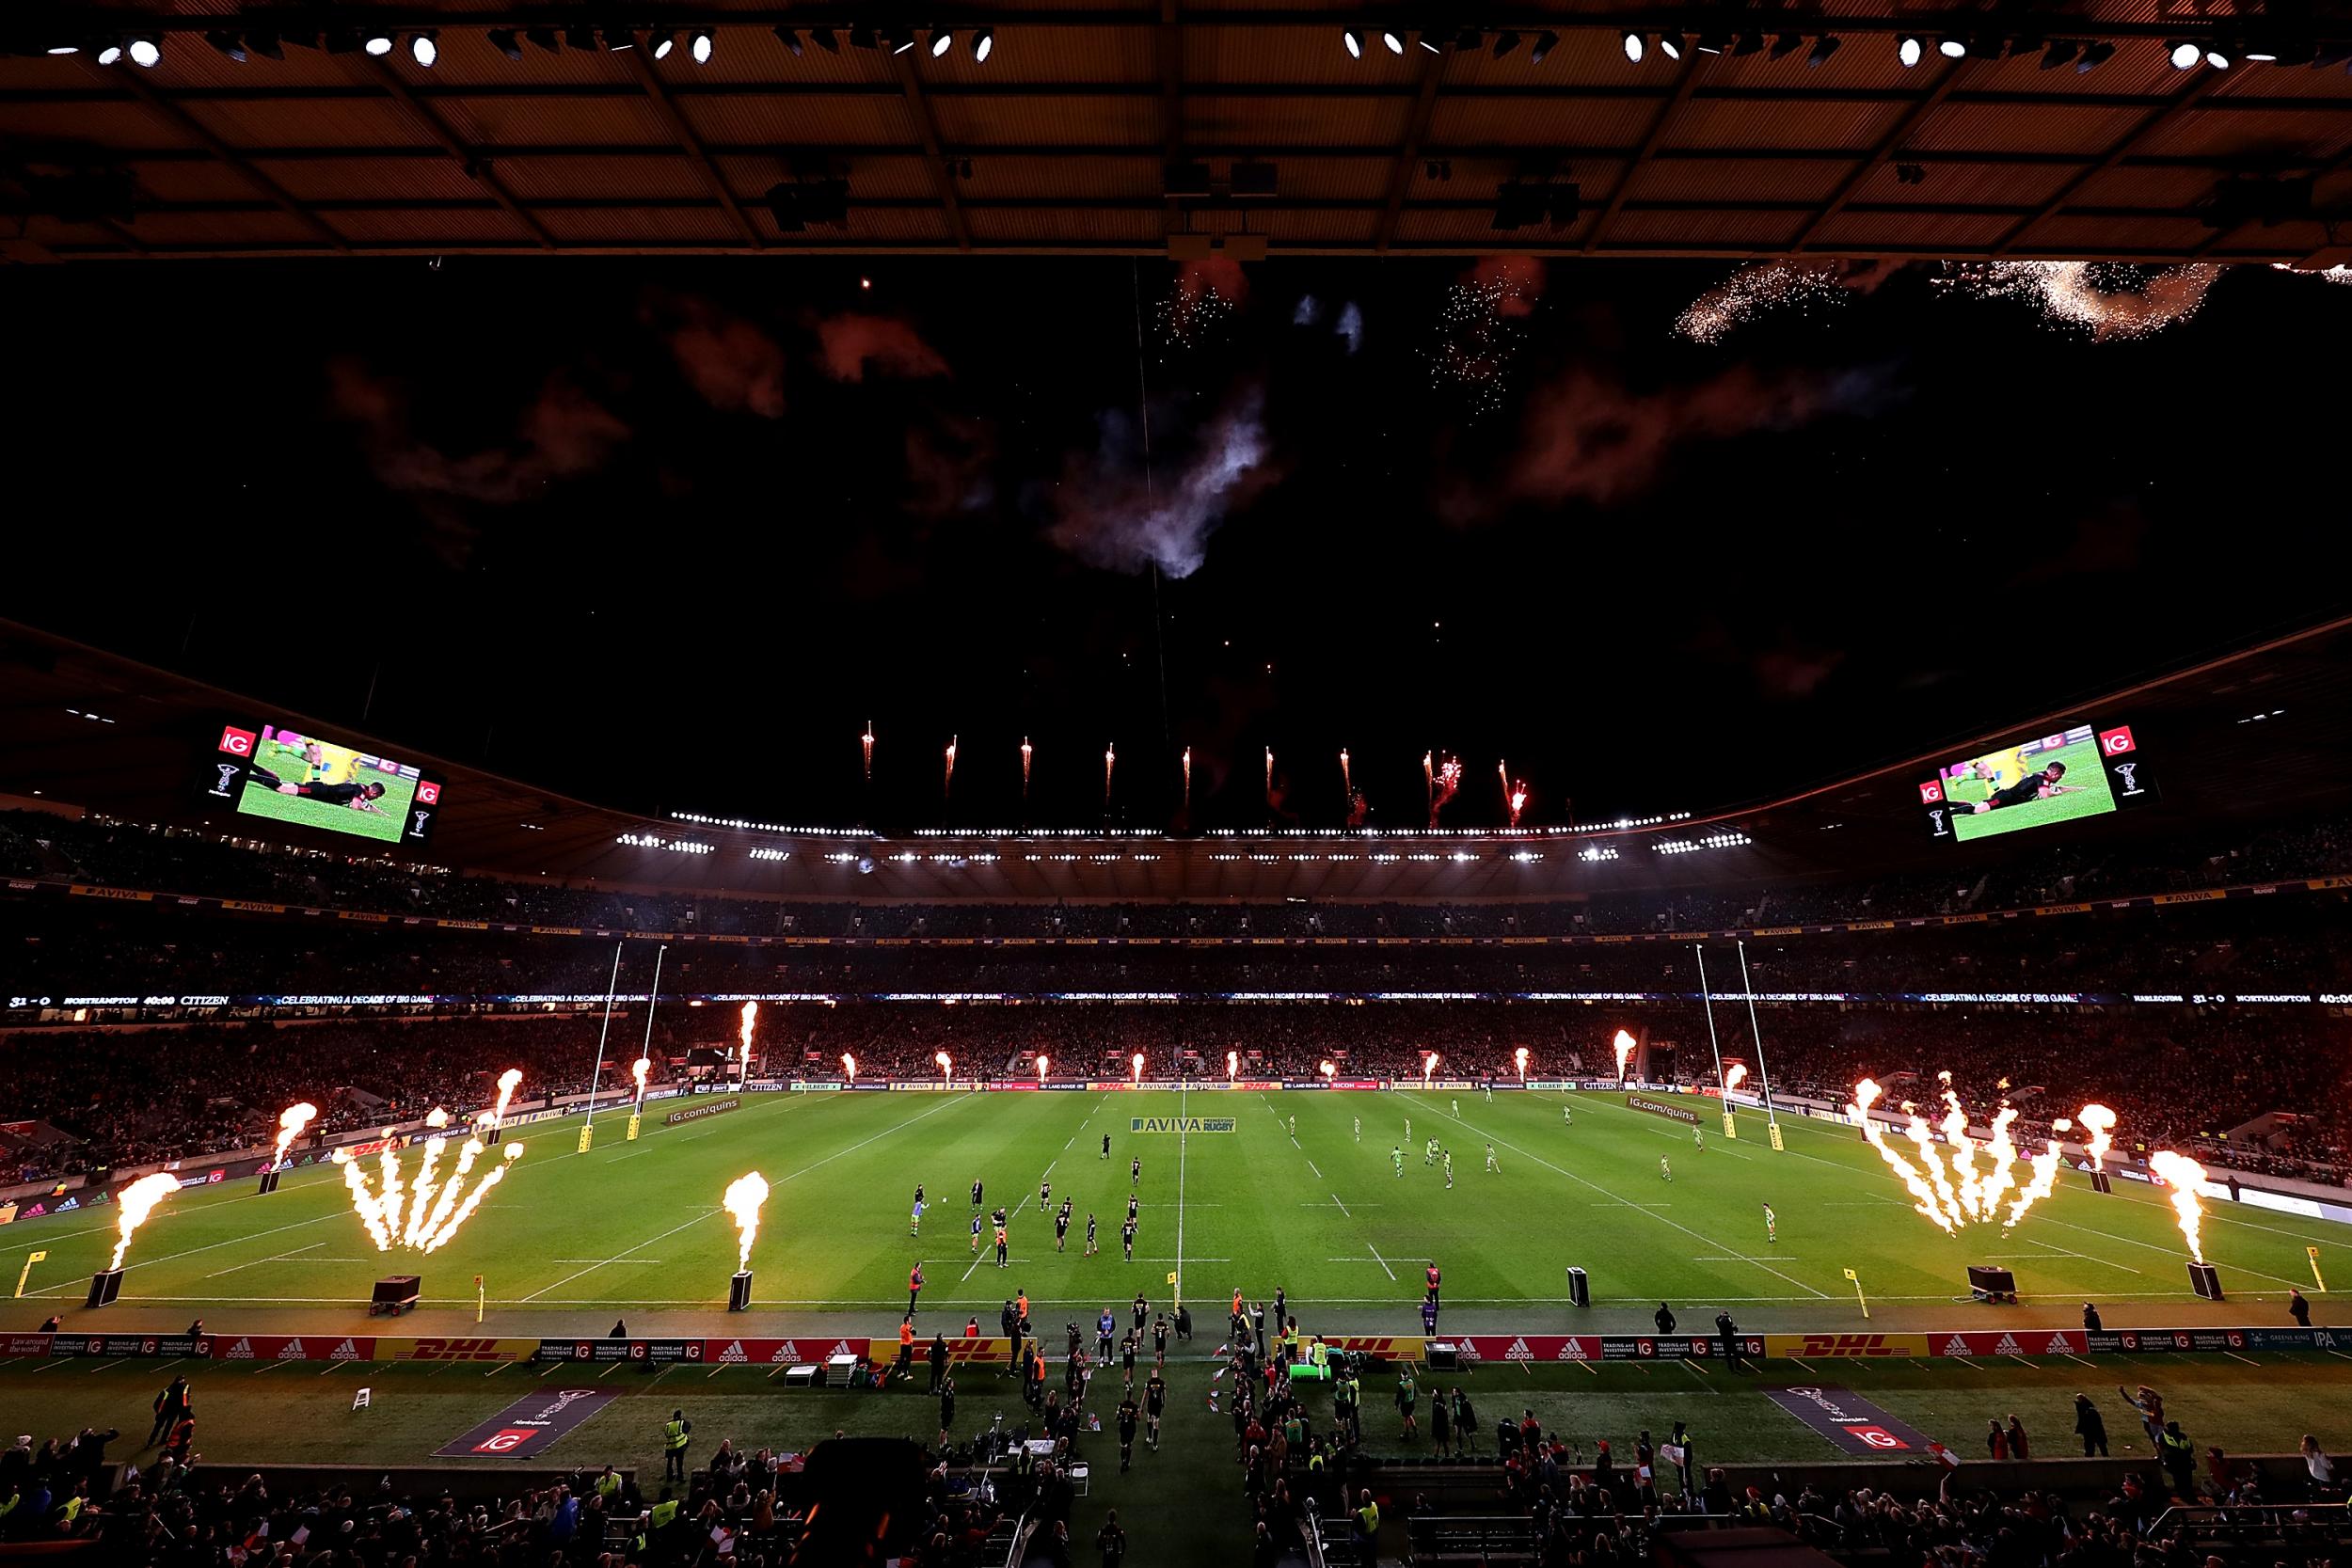 The fireworks were out at Twickenham (Getty)